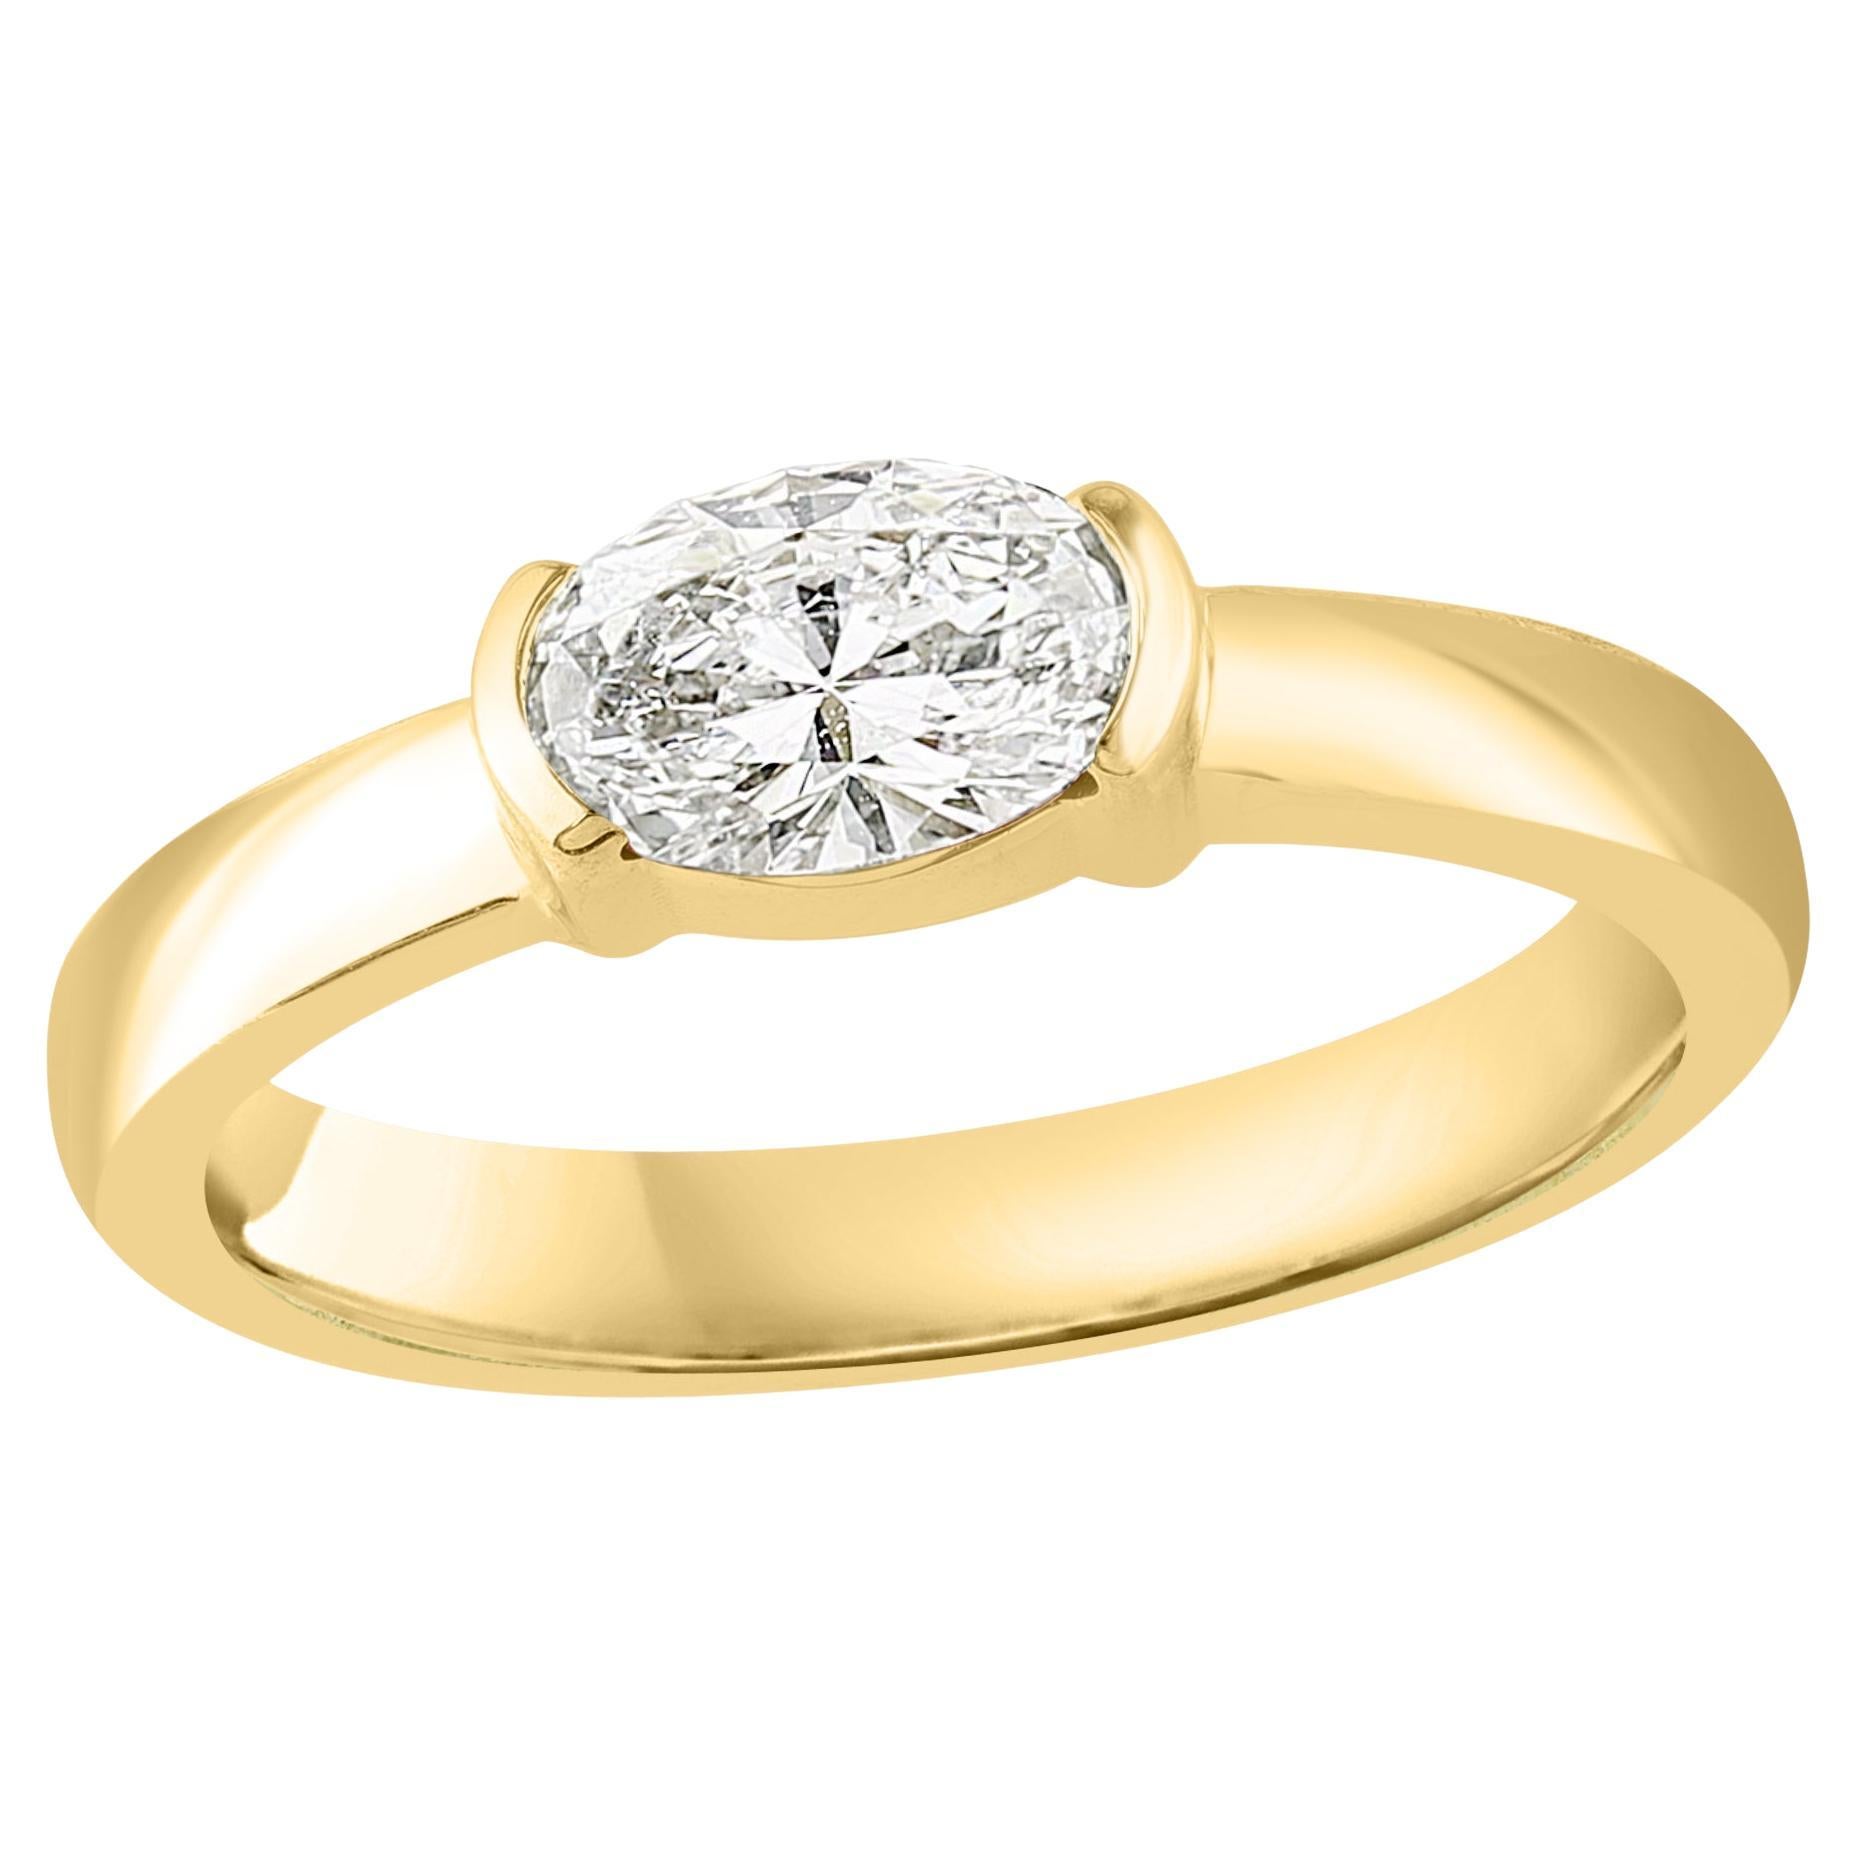 0.50 Carat Oval Cut Diamond Band Ring in 14K Yellow Gold For Sale